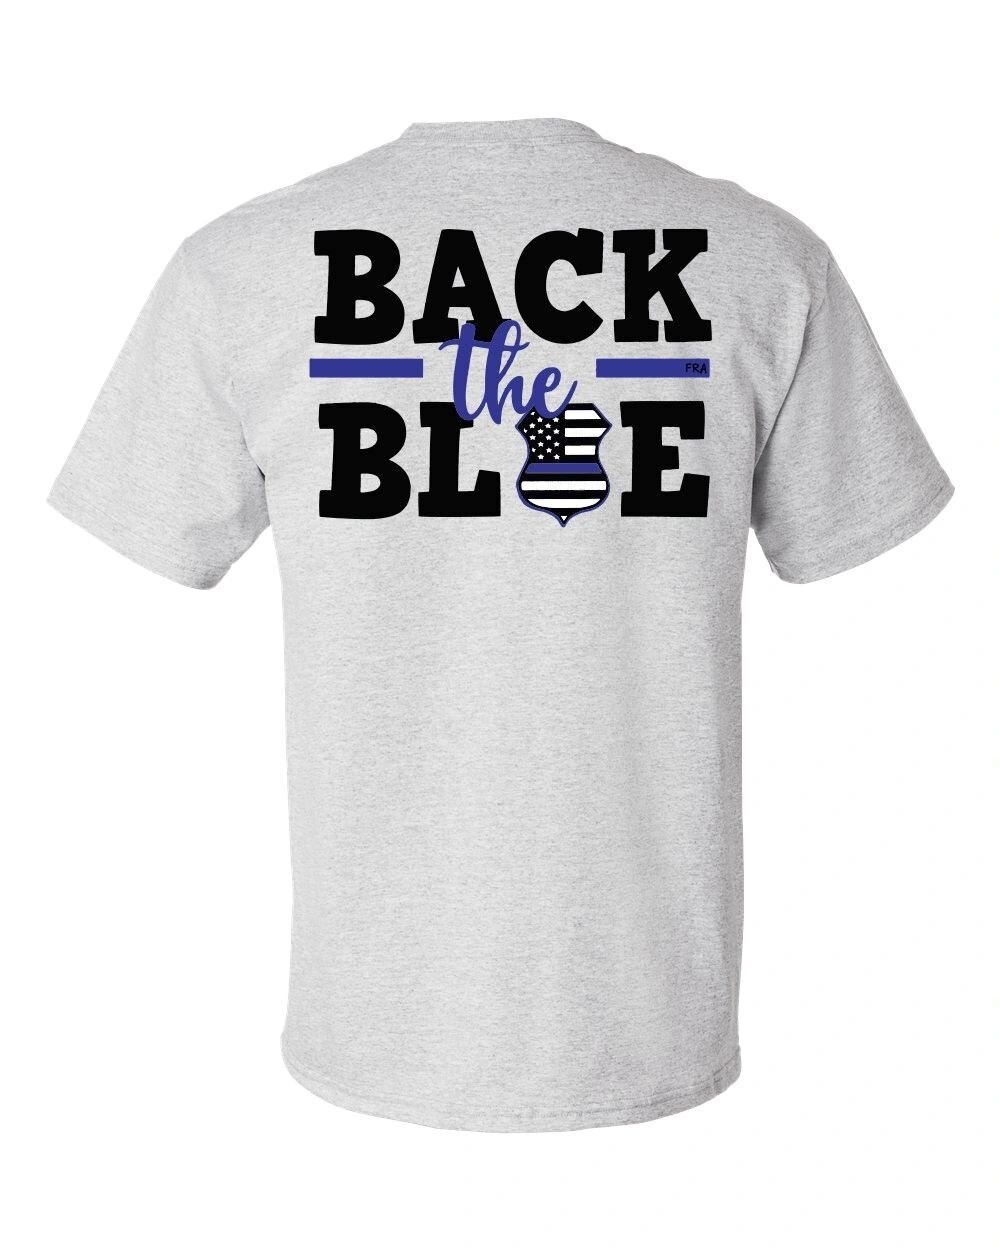 BACK THE BLUE TEE